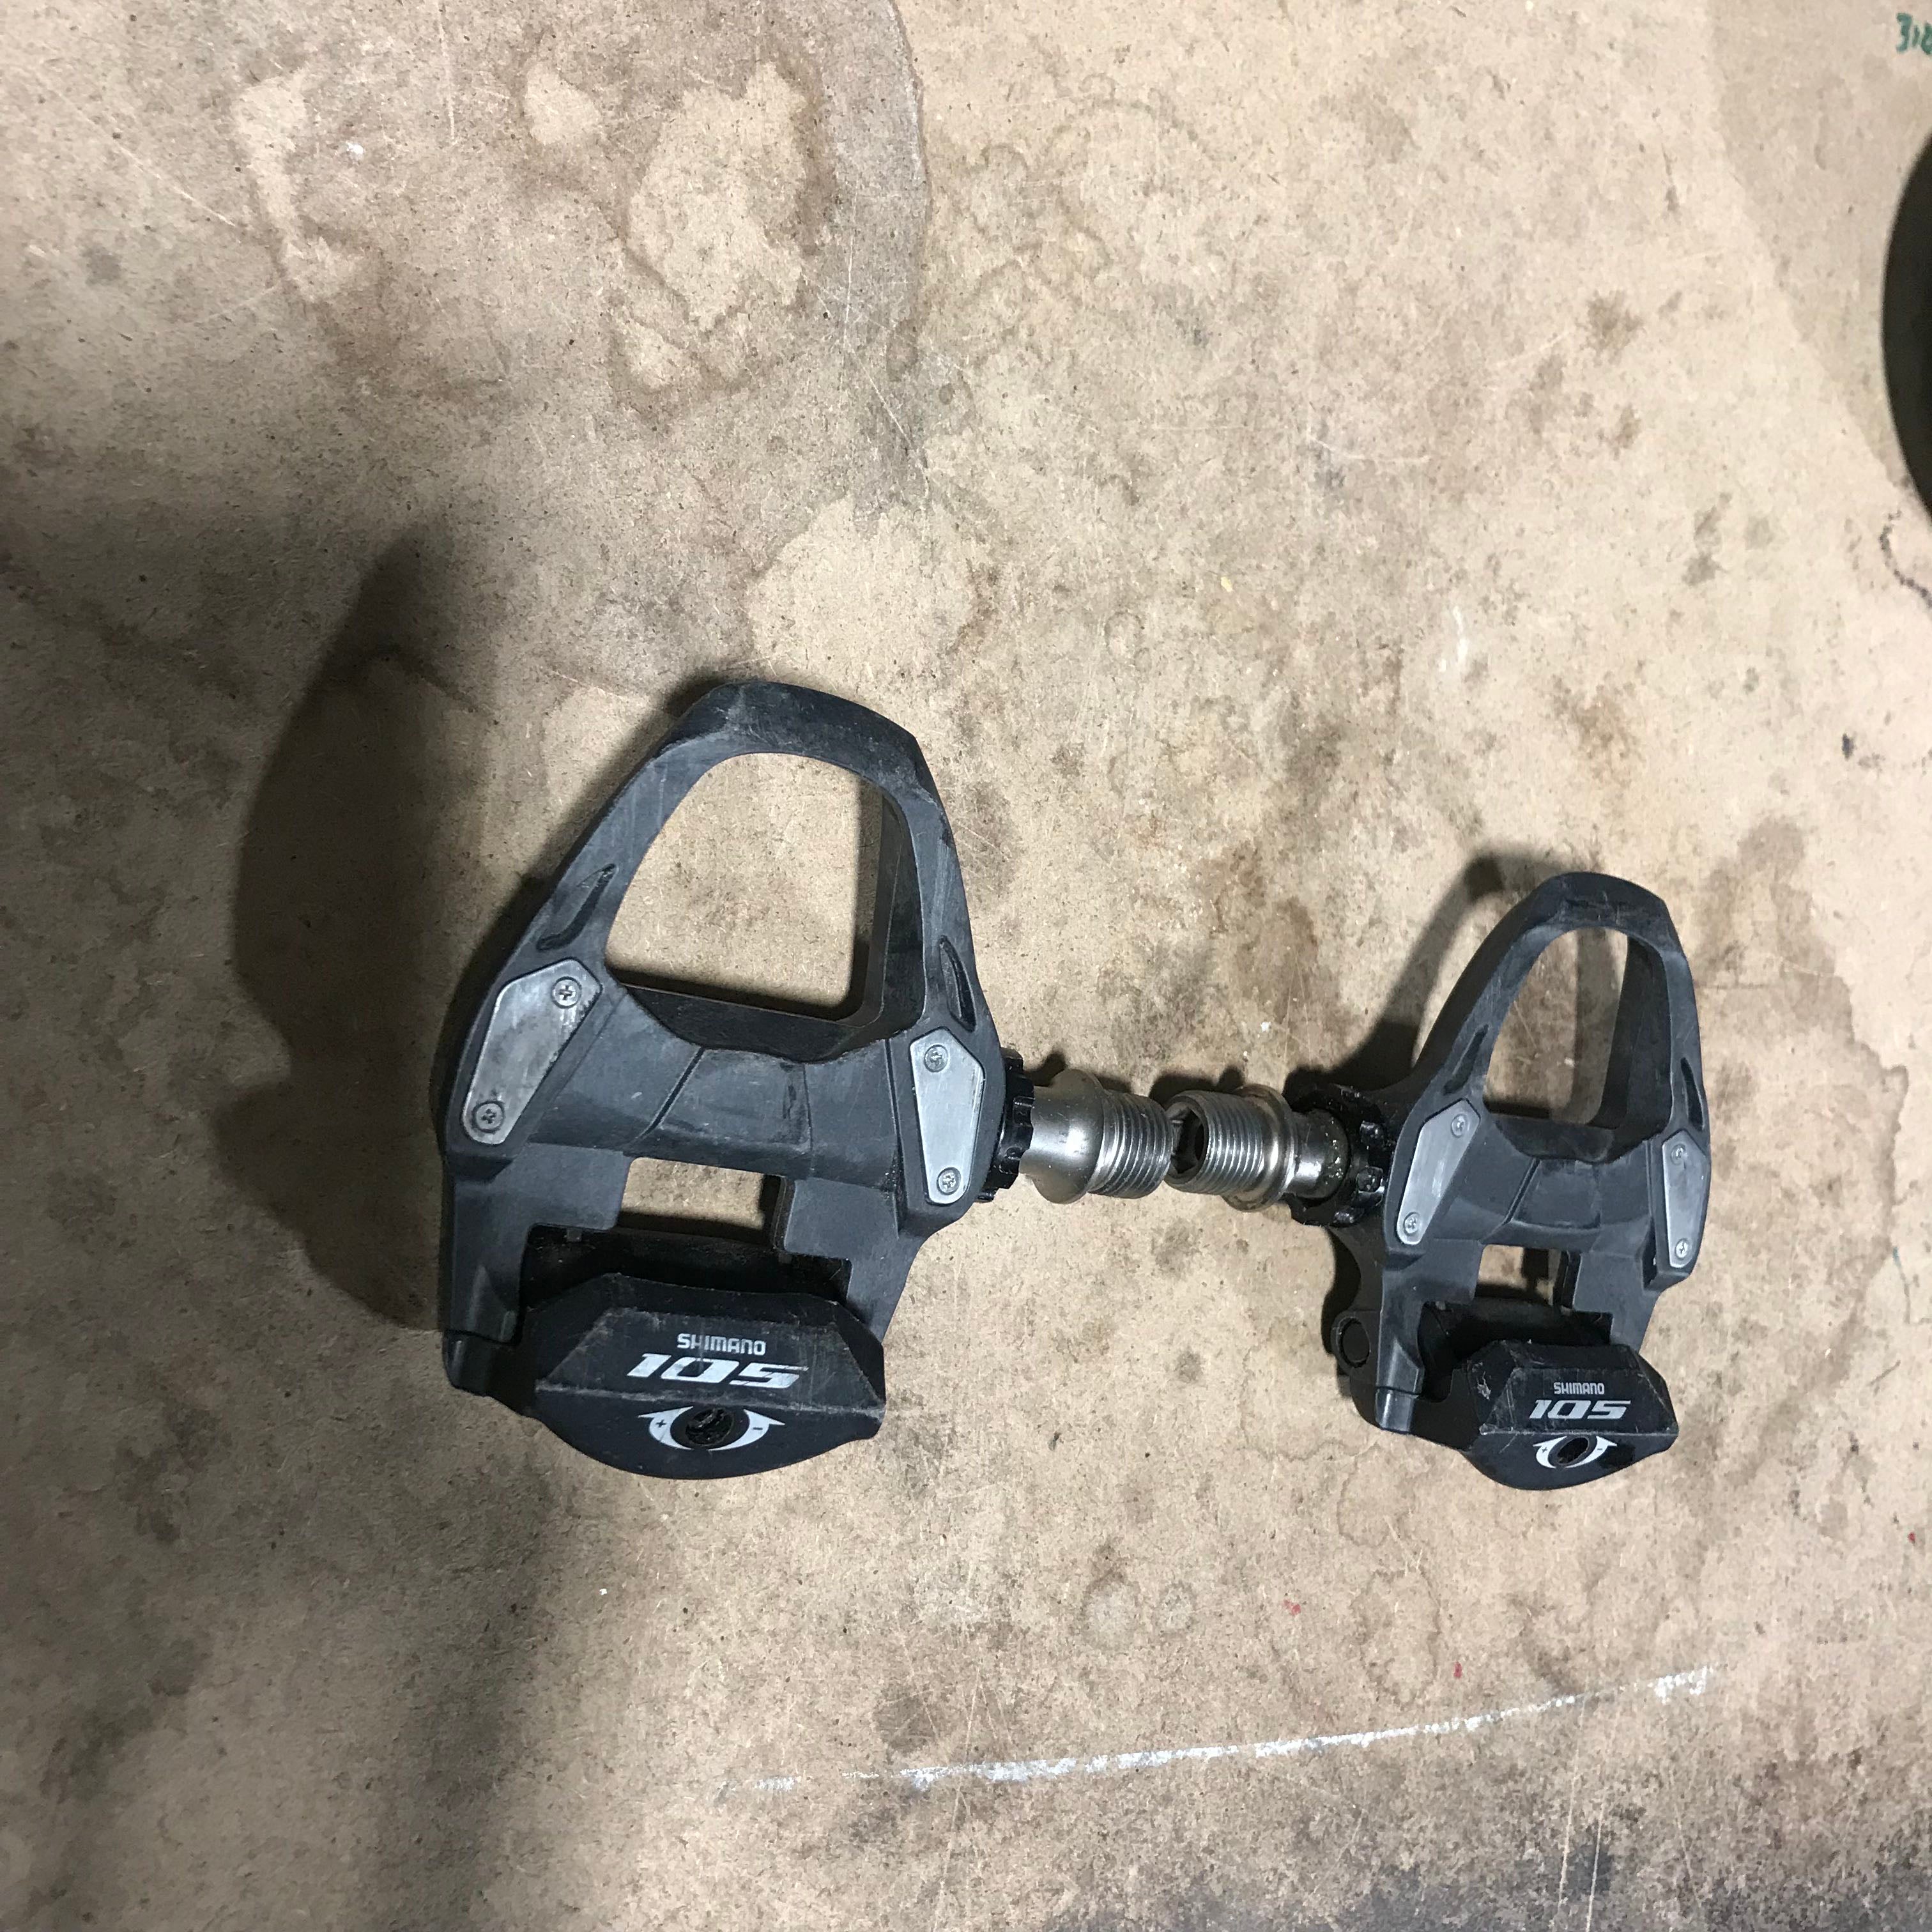 Set of 2 Shimano PD-R7000 105 Pedals